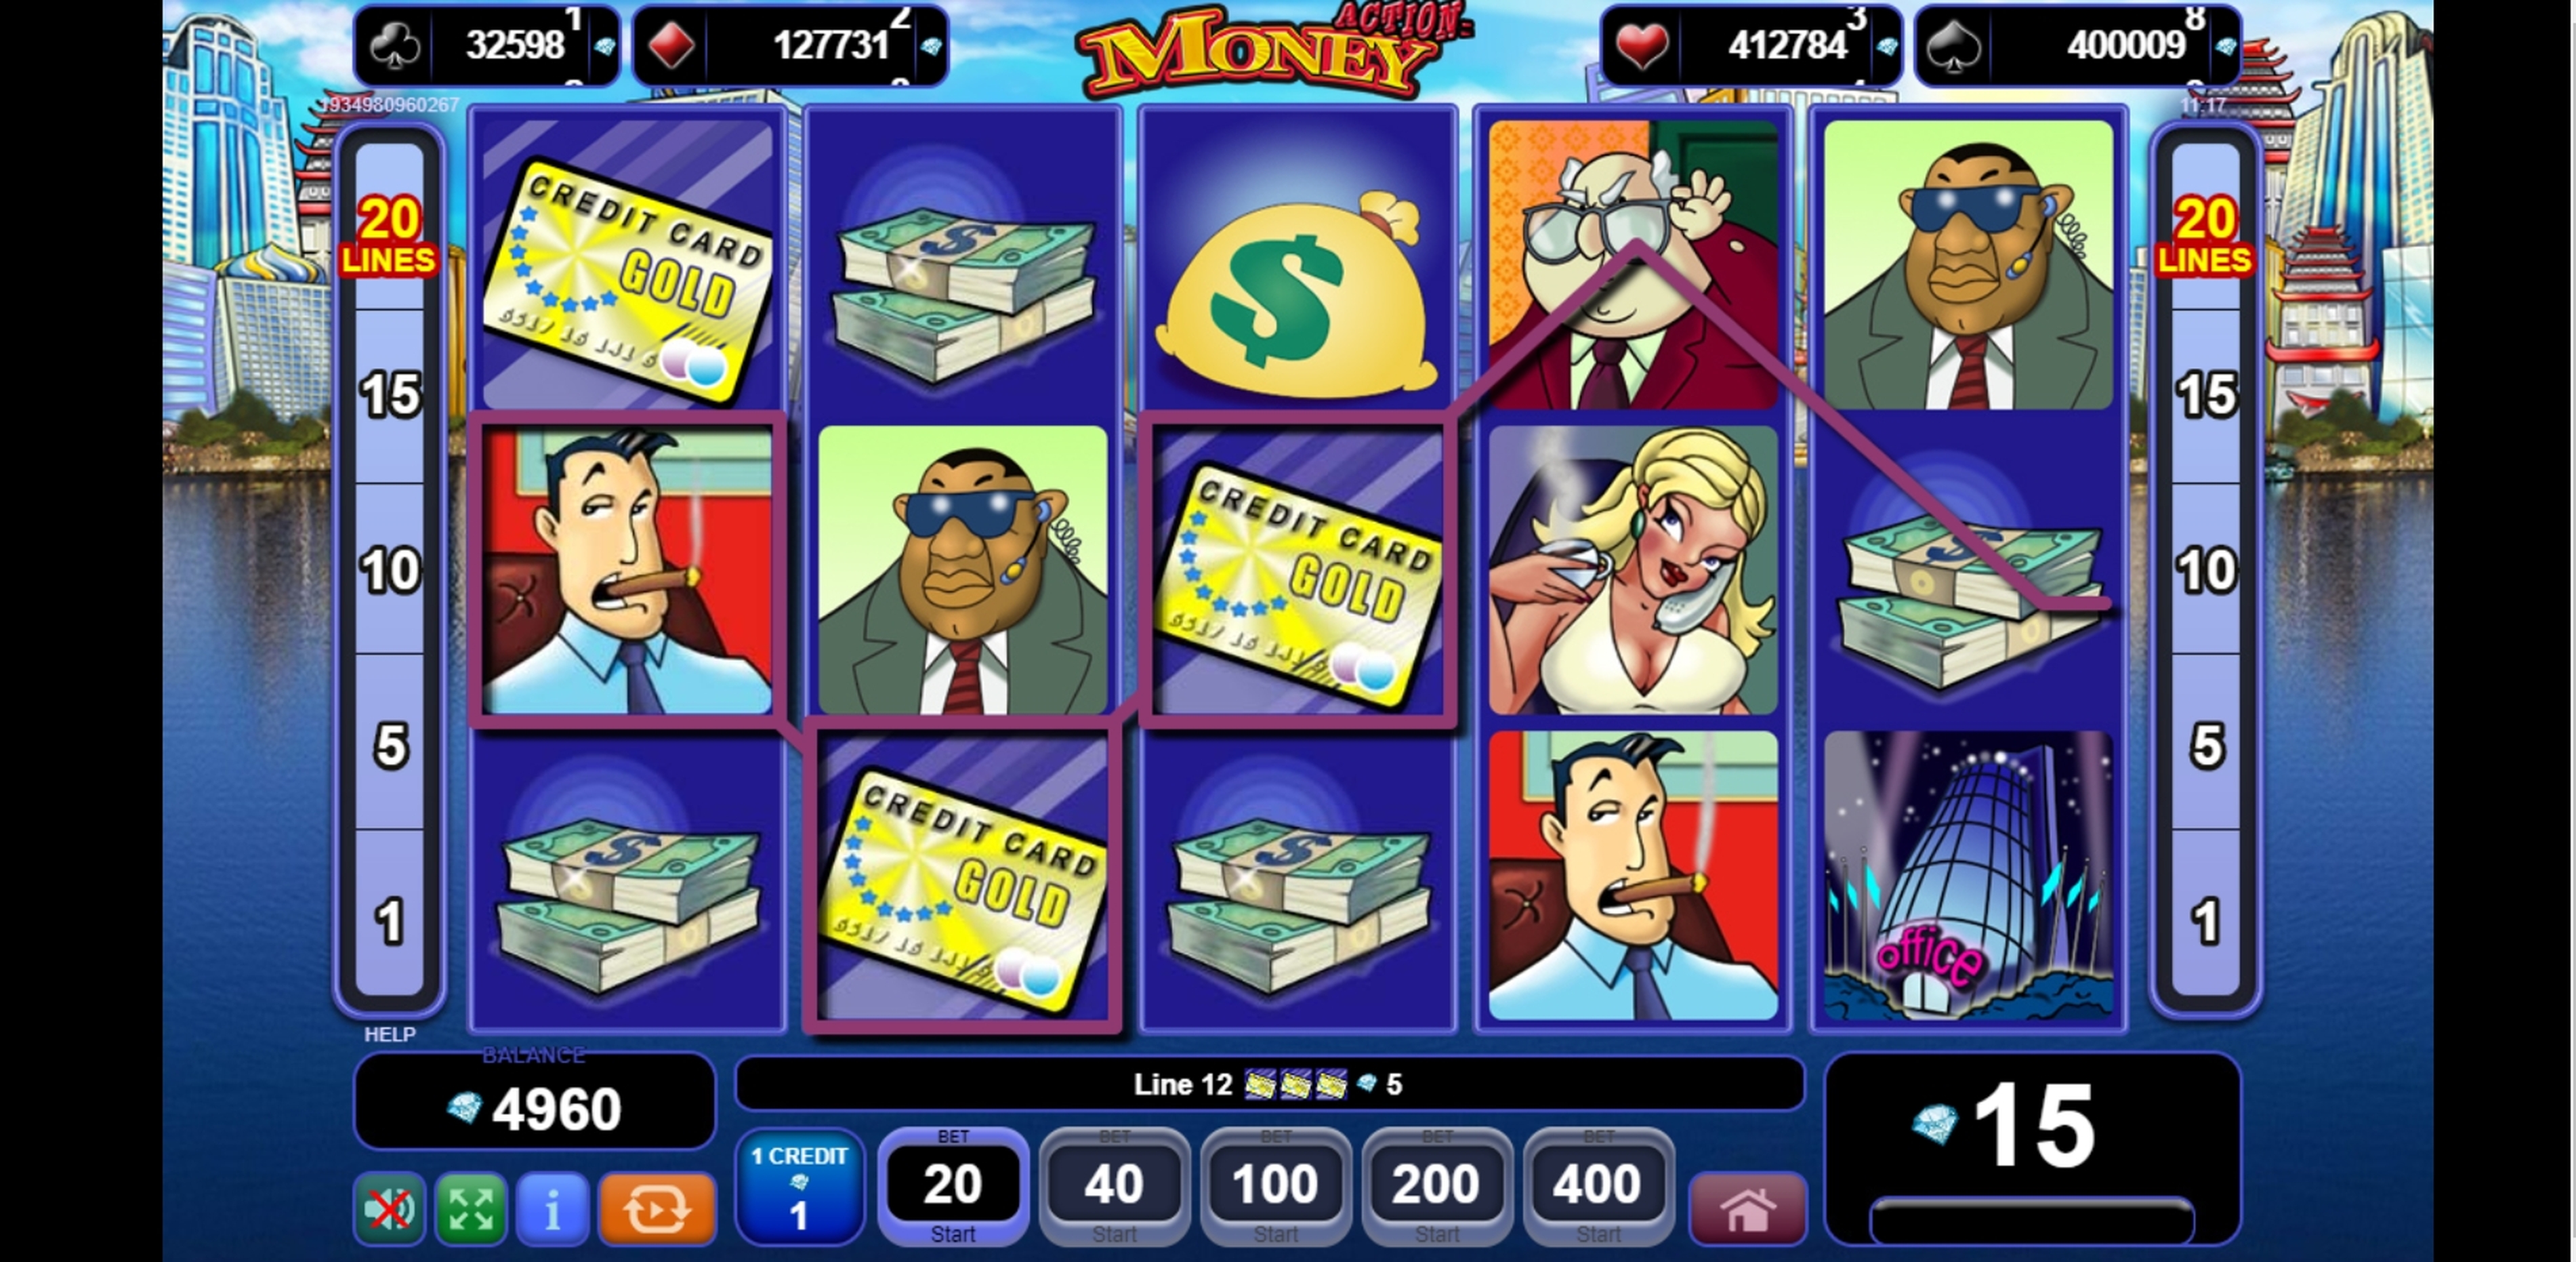 Win Money in Action Money Free Slot Game by EGT